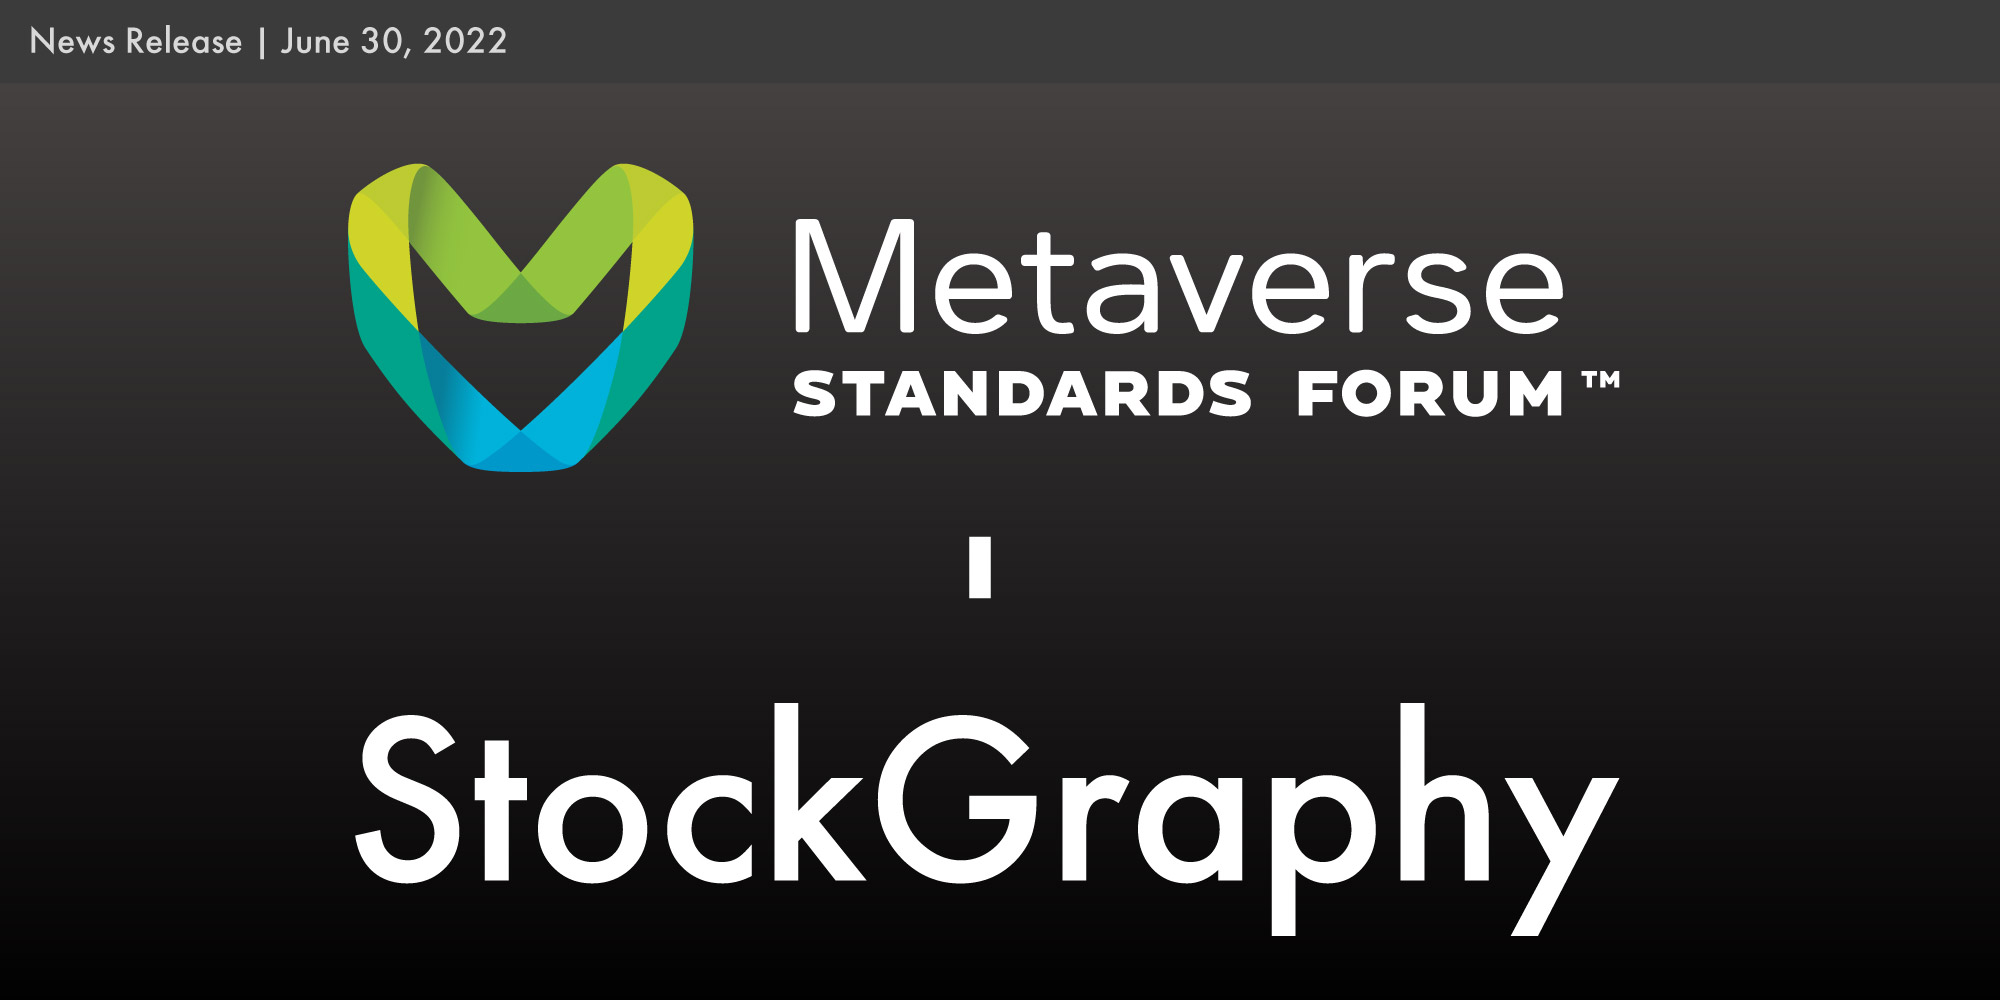 StockGraphy join the Metaverse Standards Forum.